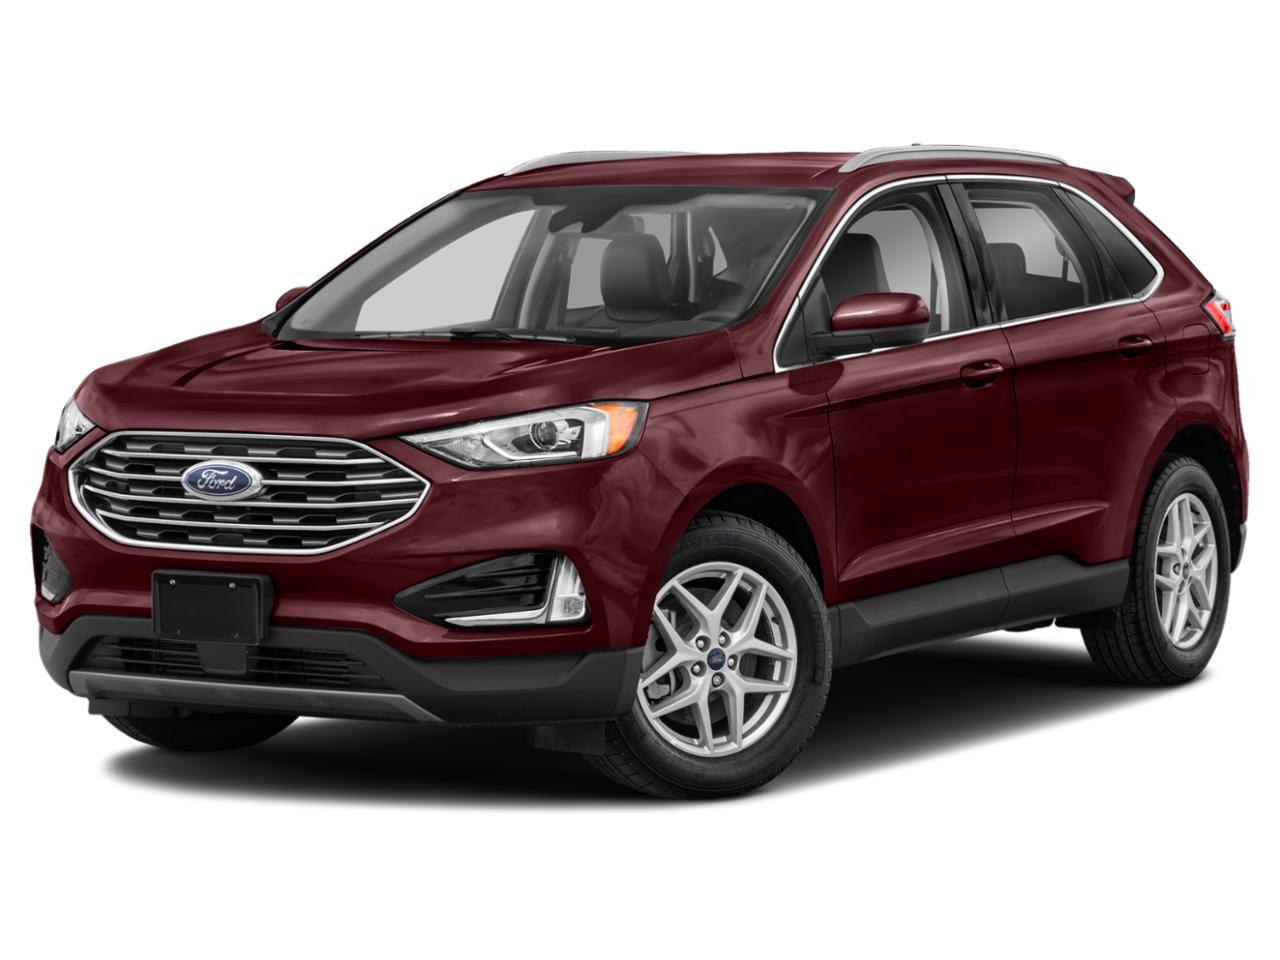 2022 Ford Edge for sale in Albion - 2FMPK4J9XNBA96637 - Edwards County